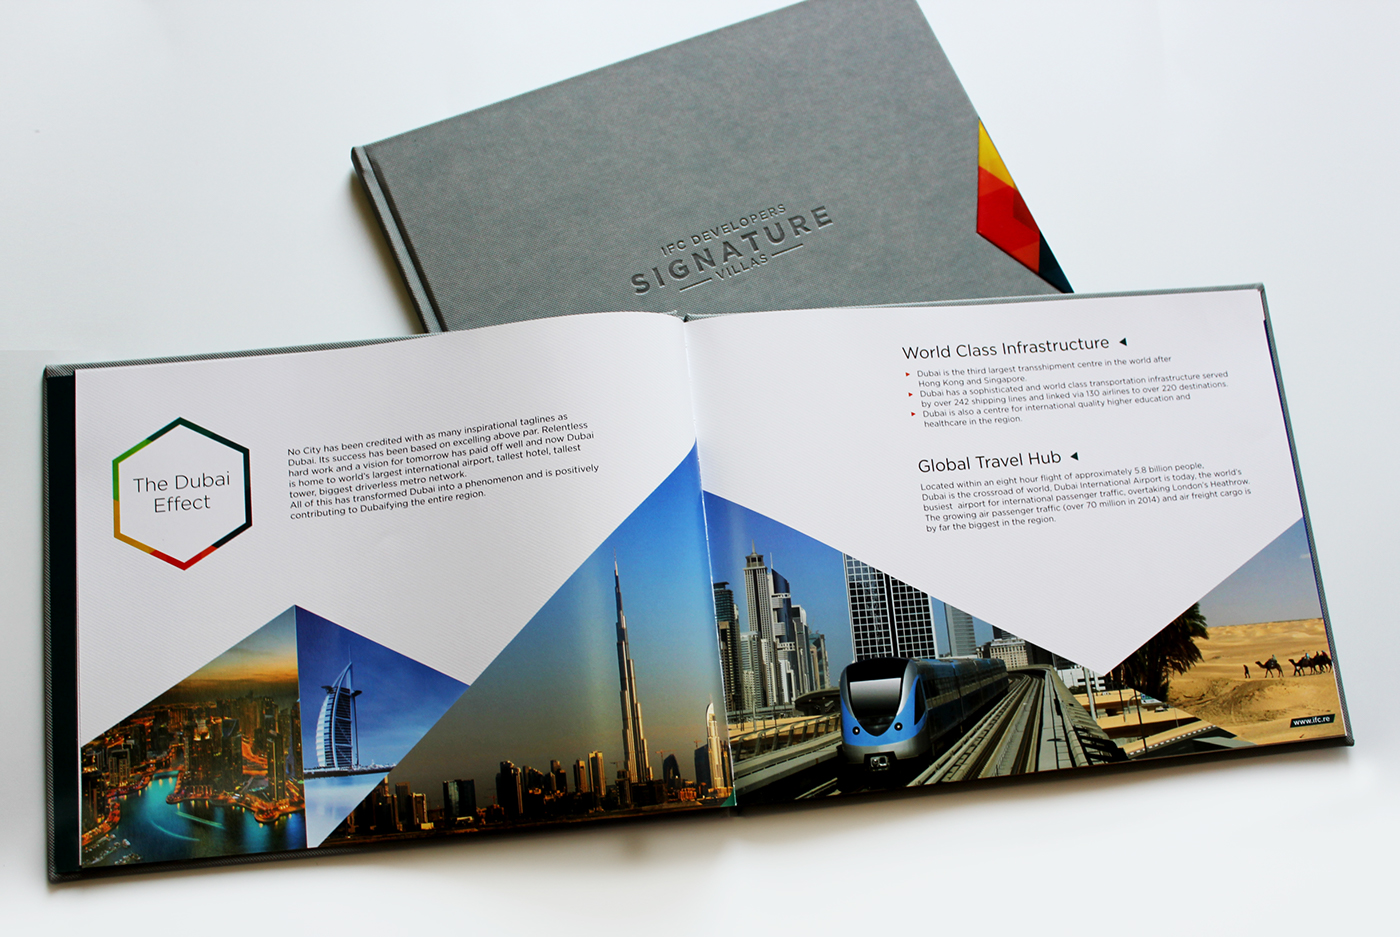 Catalouge Brochure Annual Report Property real estate dubai Villas Home Graden JVC Lahore Pakistan Layout Typography Indesign Hard Case Publishing corporate branding hexagone color colour binidng leather grey emboss deboss epoxy perfact binding ofset company profile